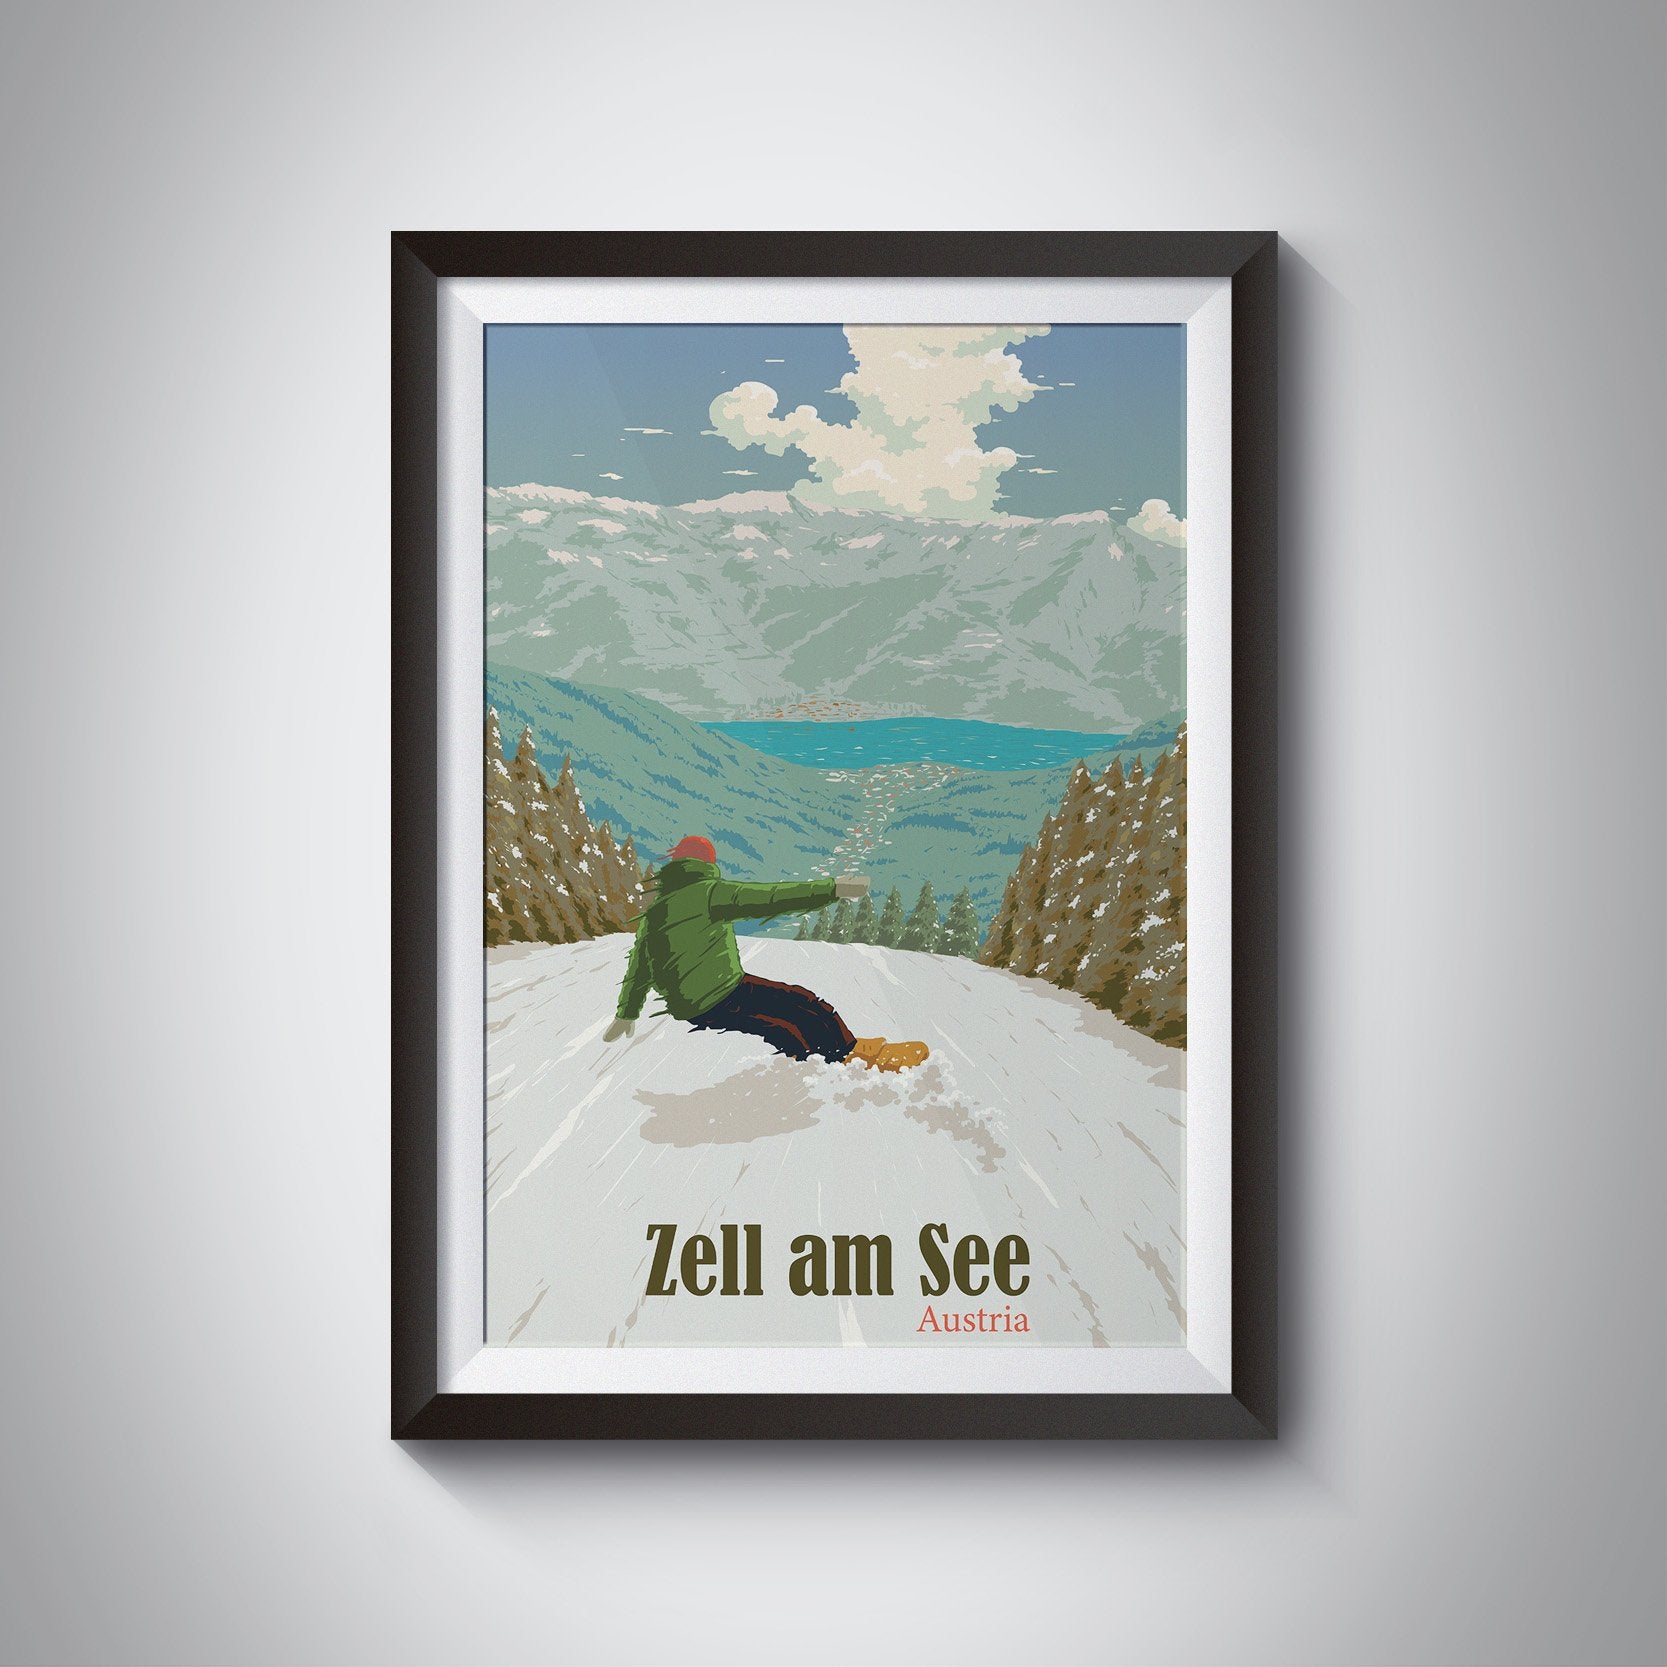 Zell am See Austria Snowboarding Travel Poster